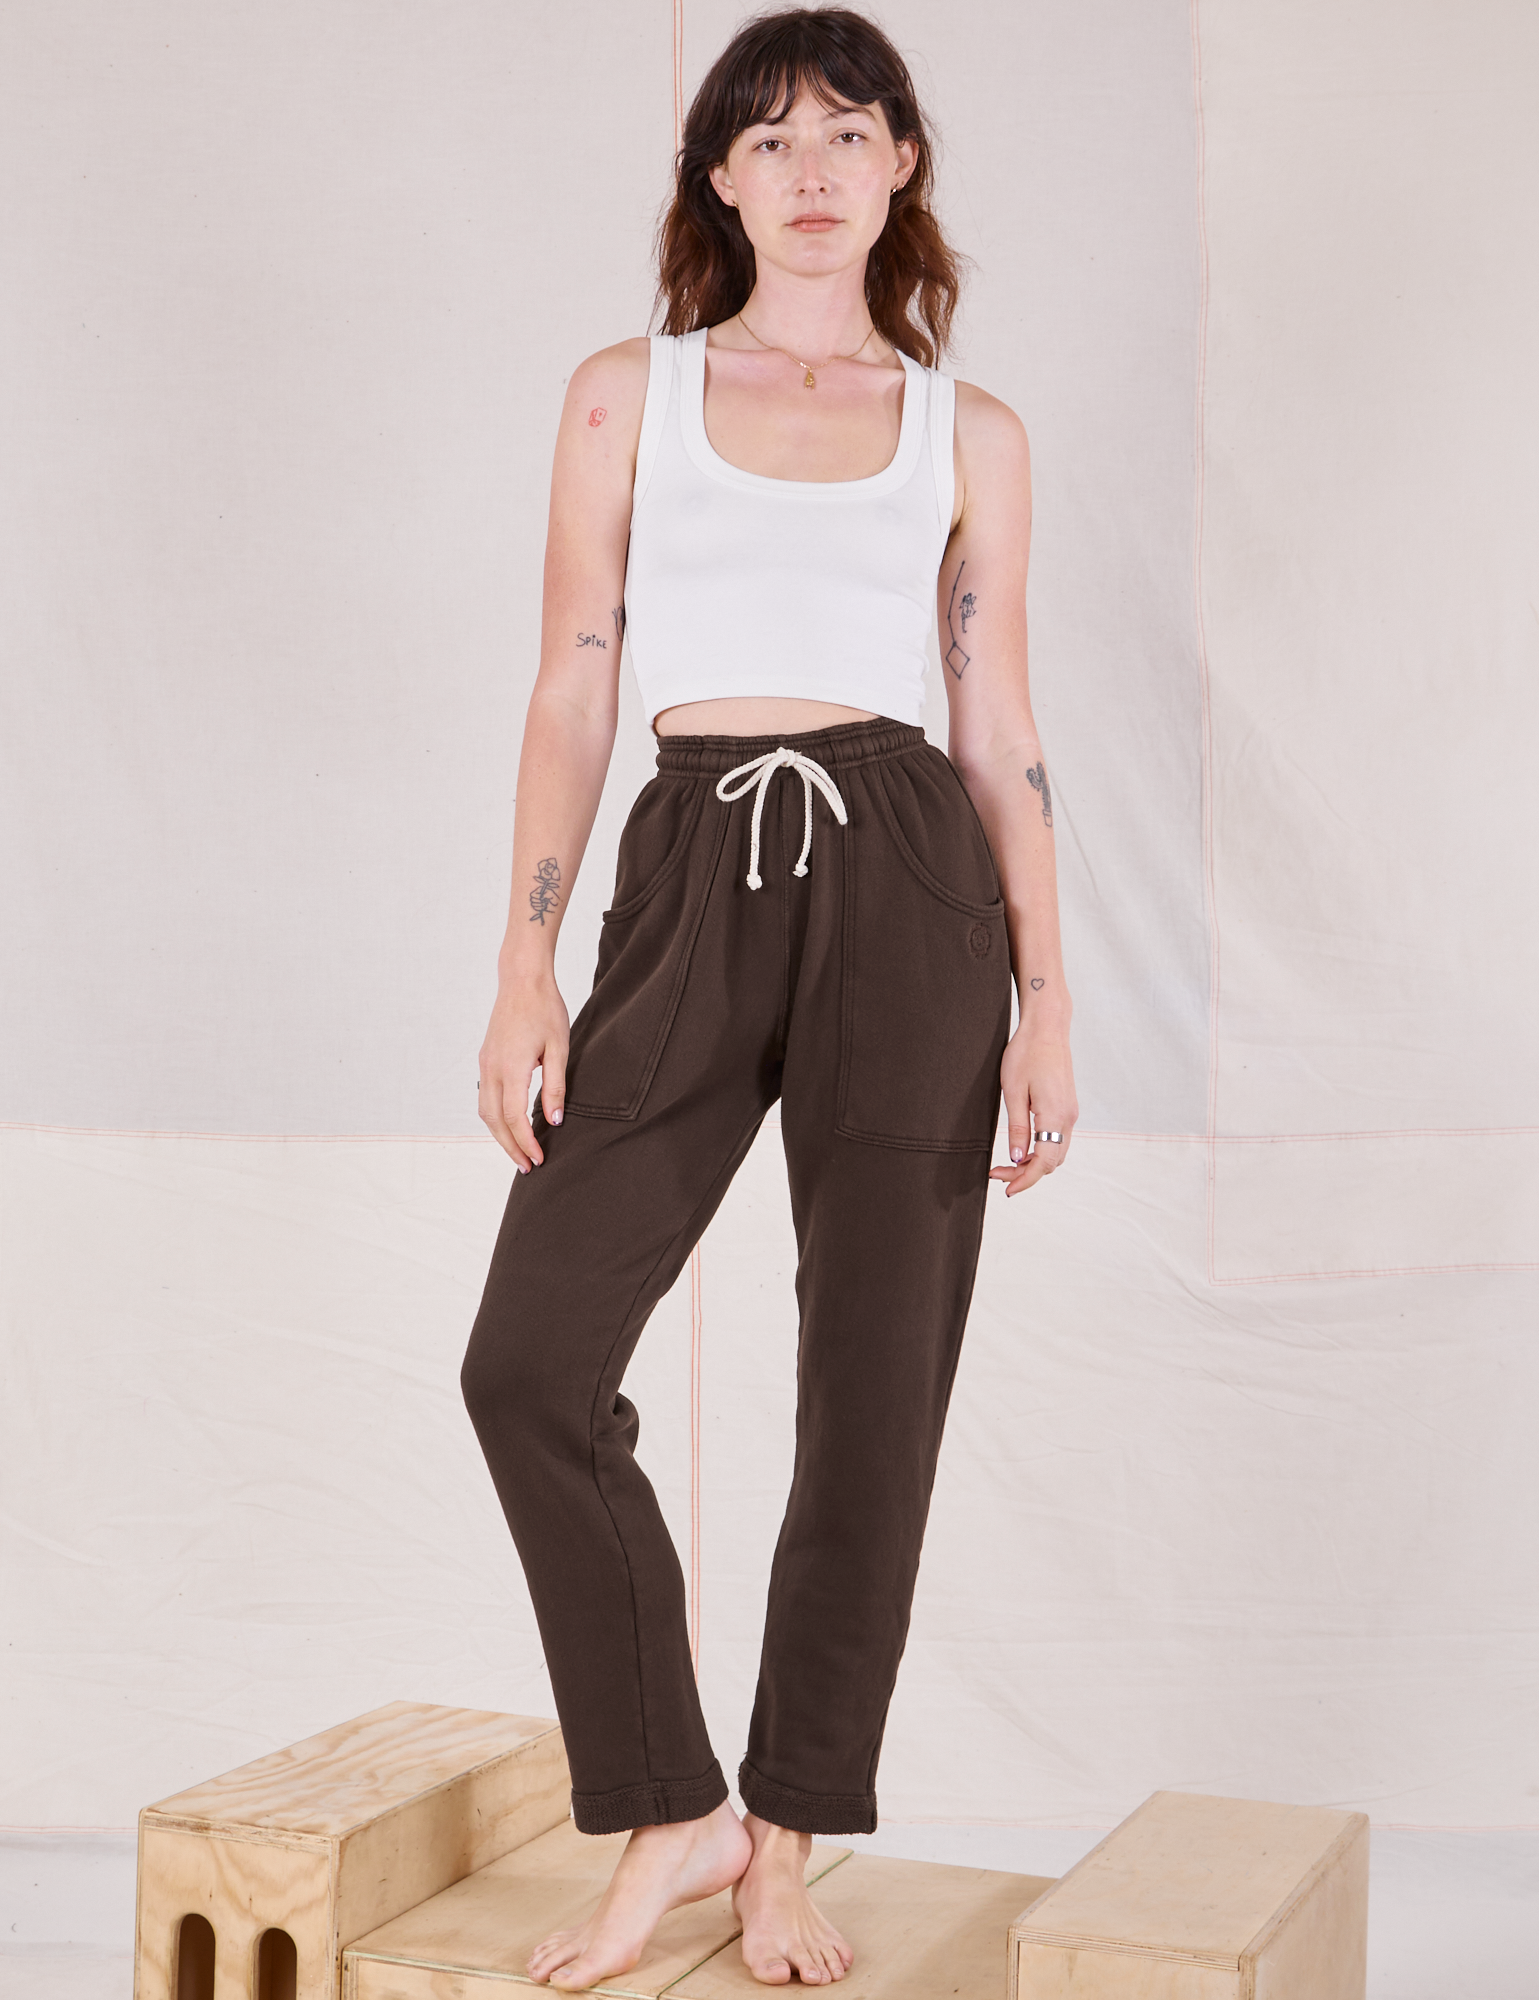 Alex is 5&#39;8&quot; and wearing P Rolled Cuff Sweat Pants in Espresso Brown paired with Cropped Tank in vintage tee off-white